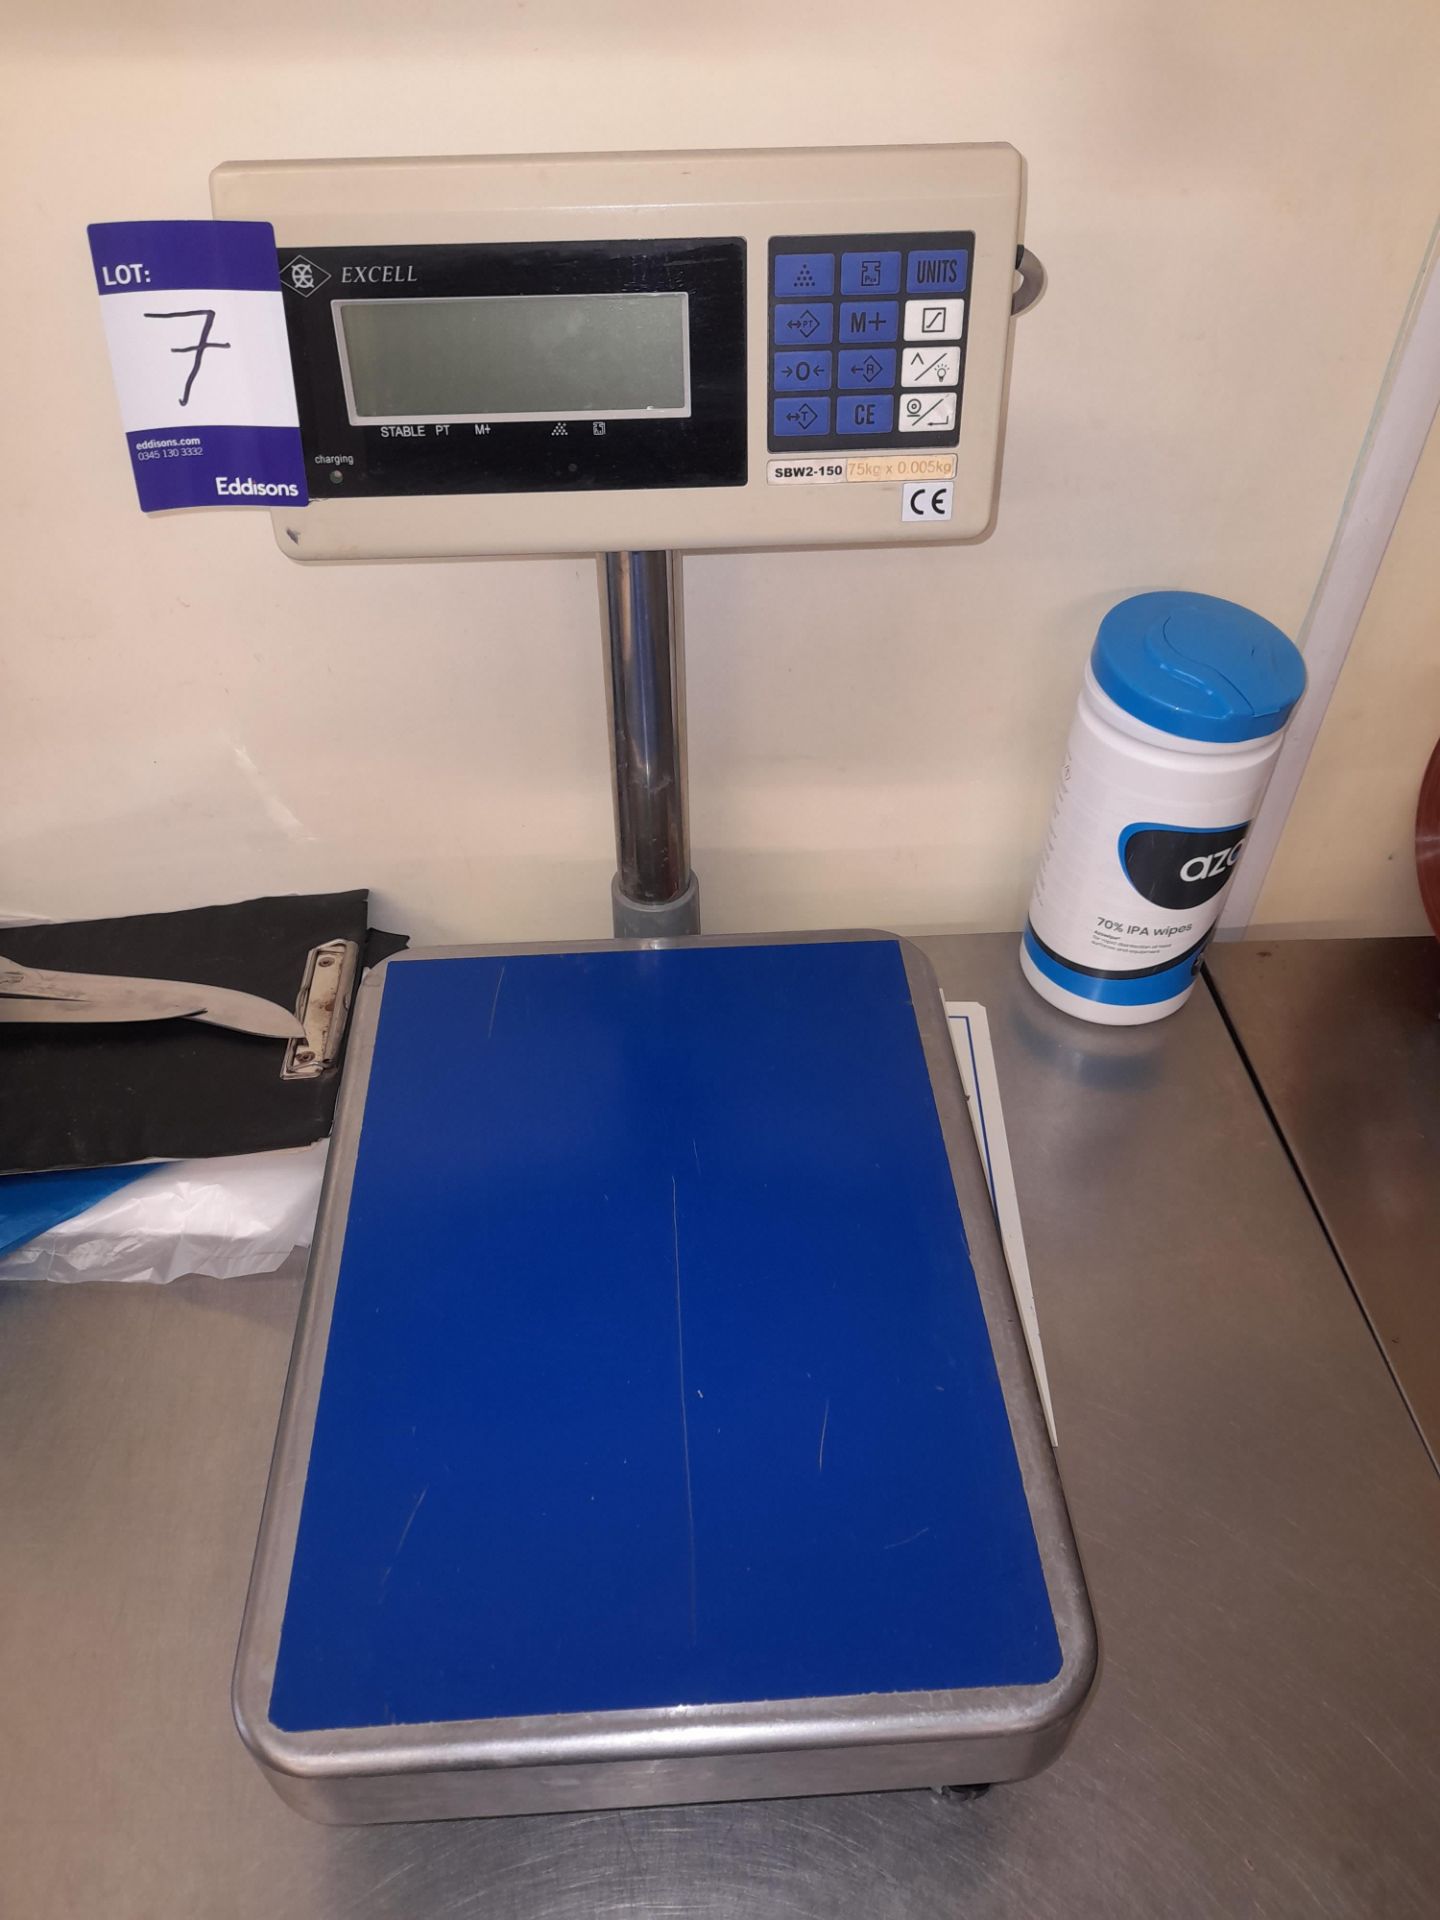 Excell SBW2-150 scales